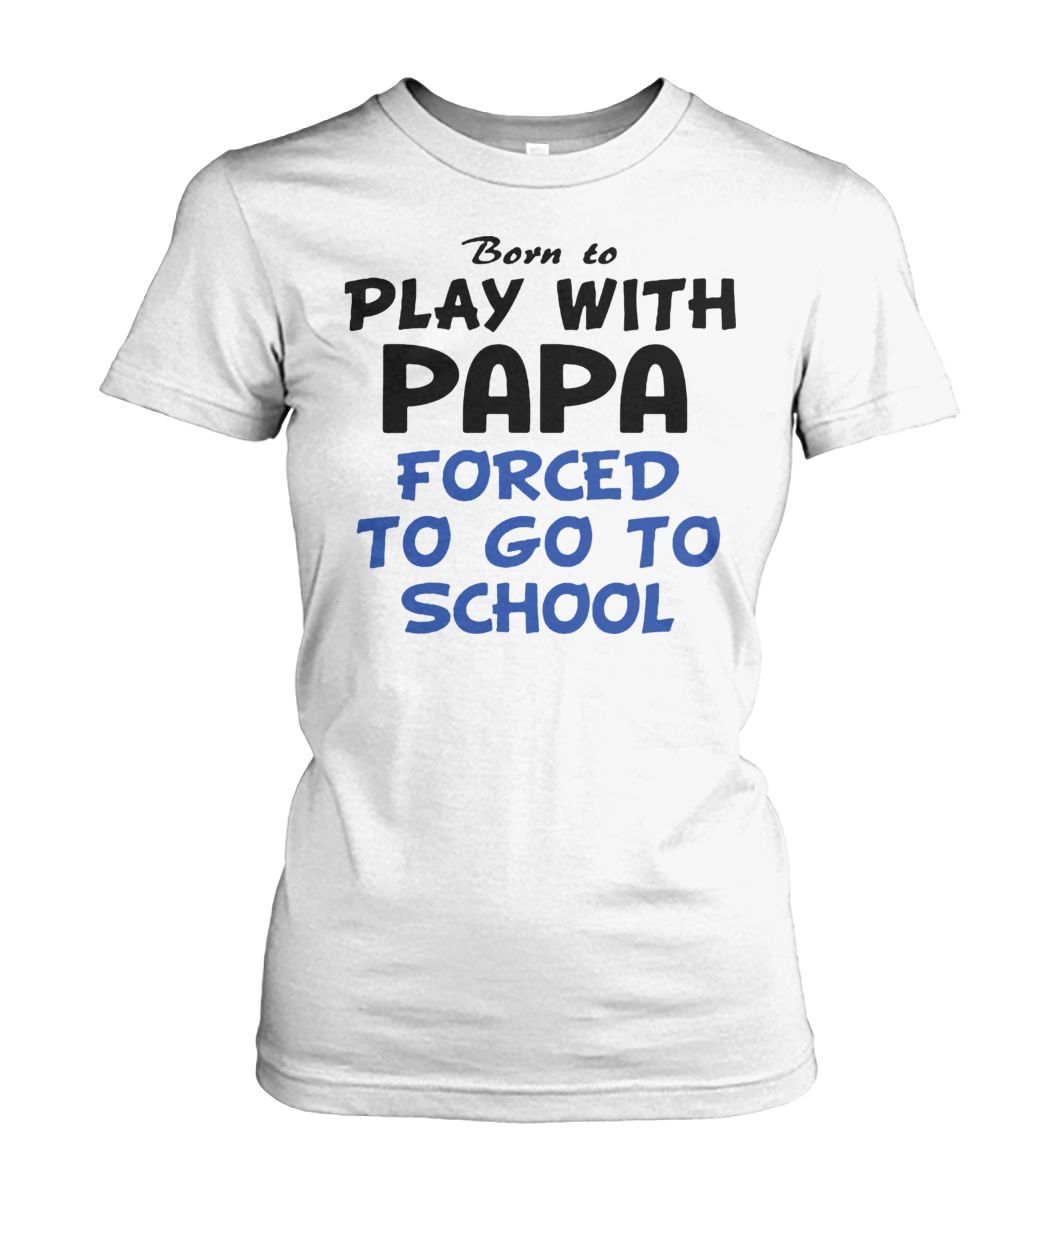 Born to play with papa forced to go to school women's crew tee